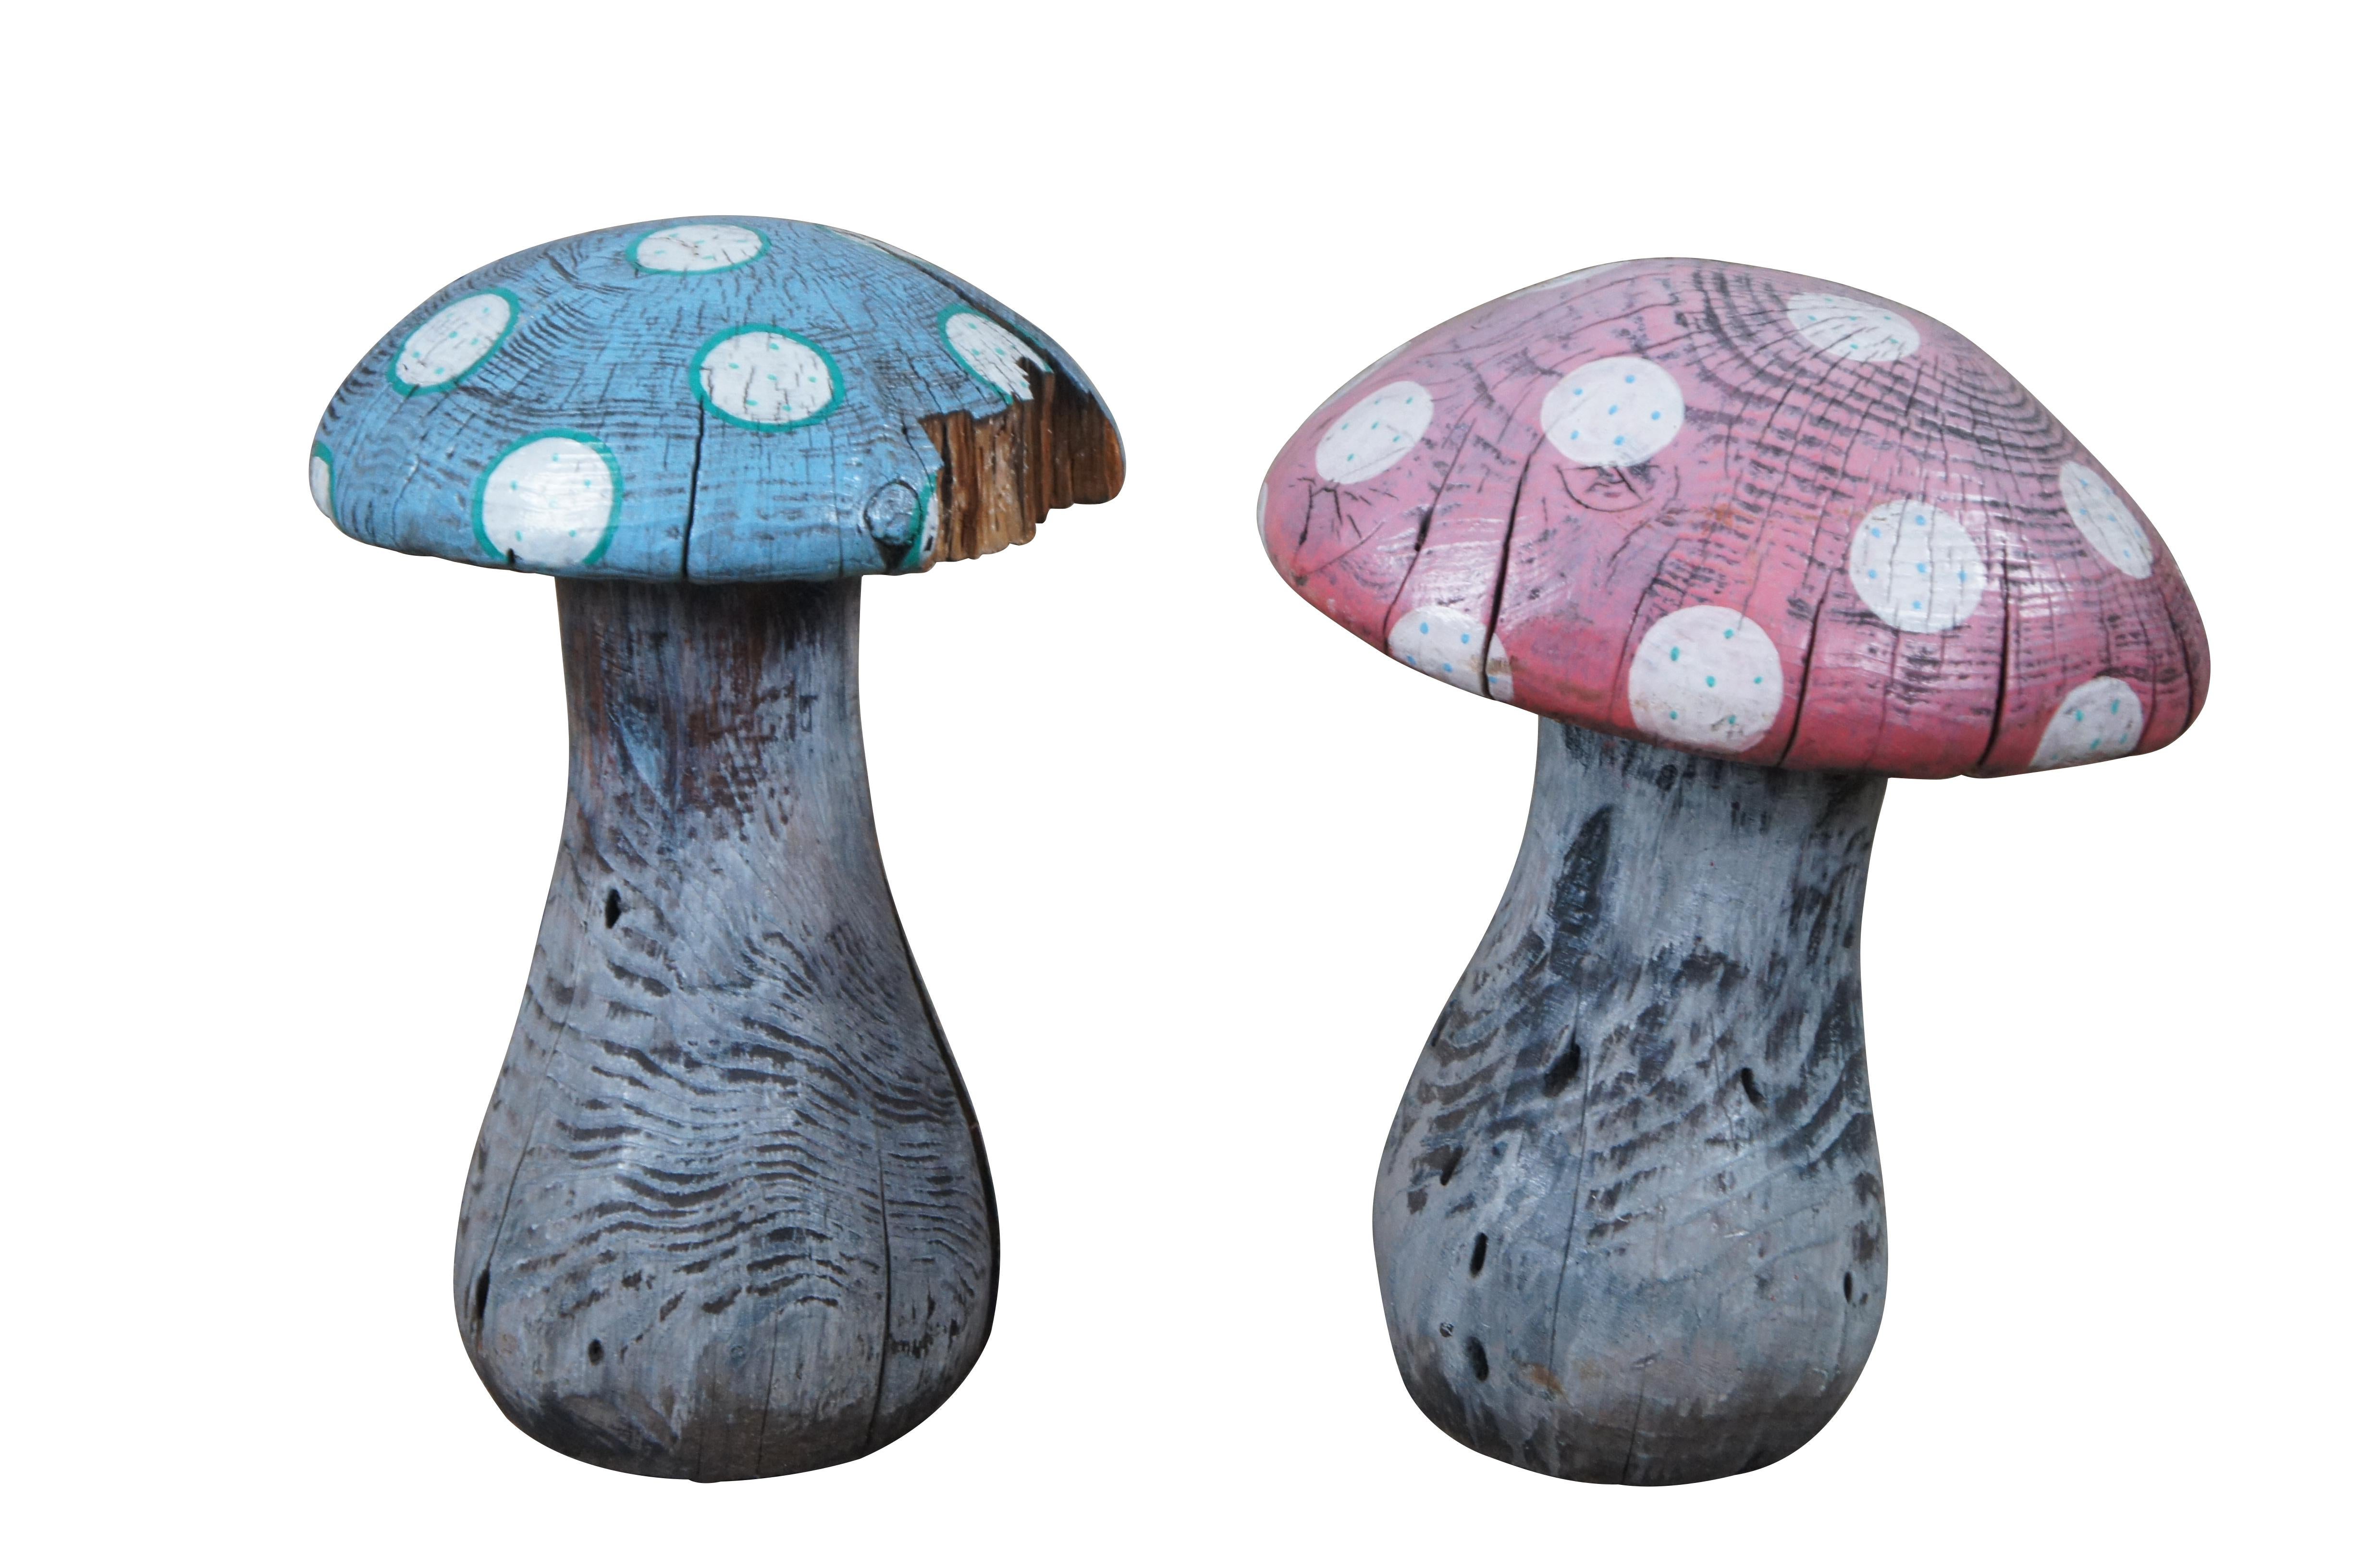 2 carved and painted mushrooms sculptures by JD.  Signed along underside. 

Dimensions:
15